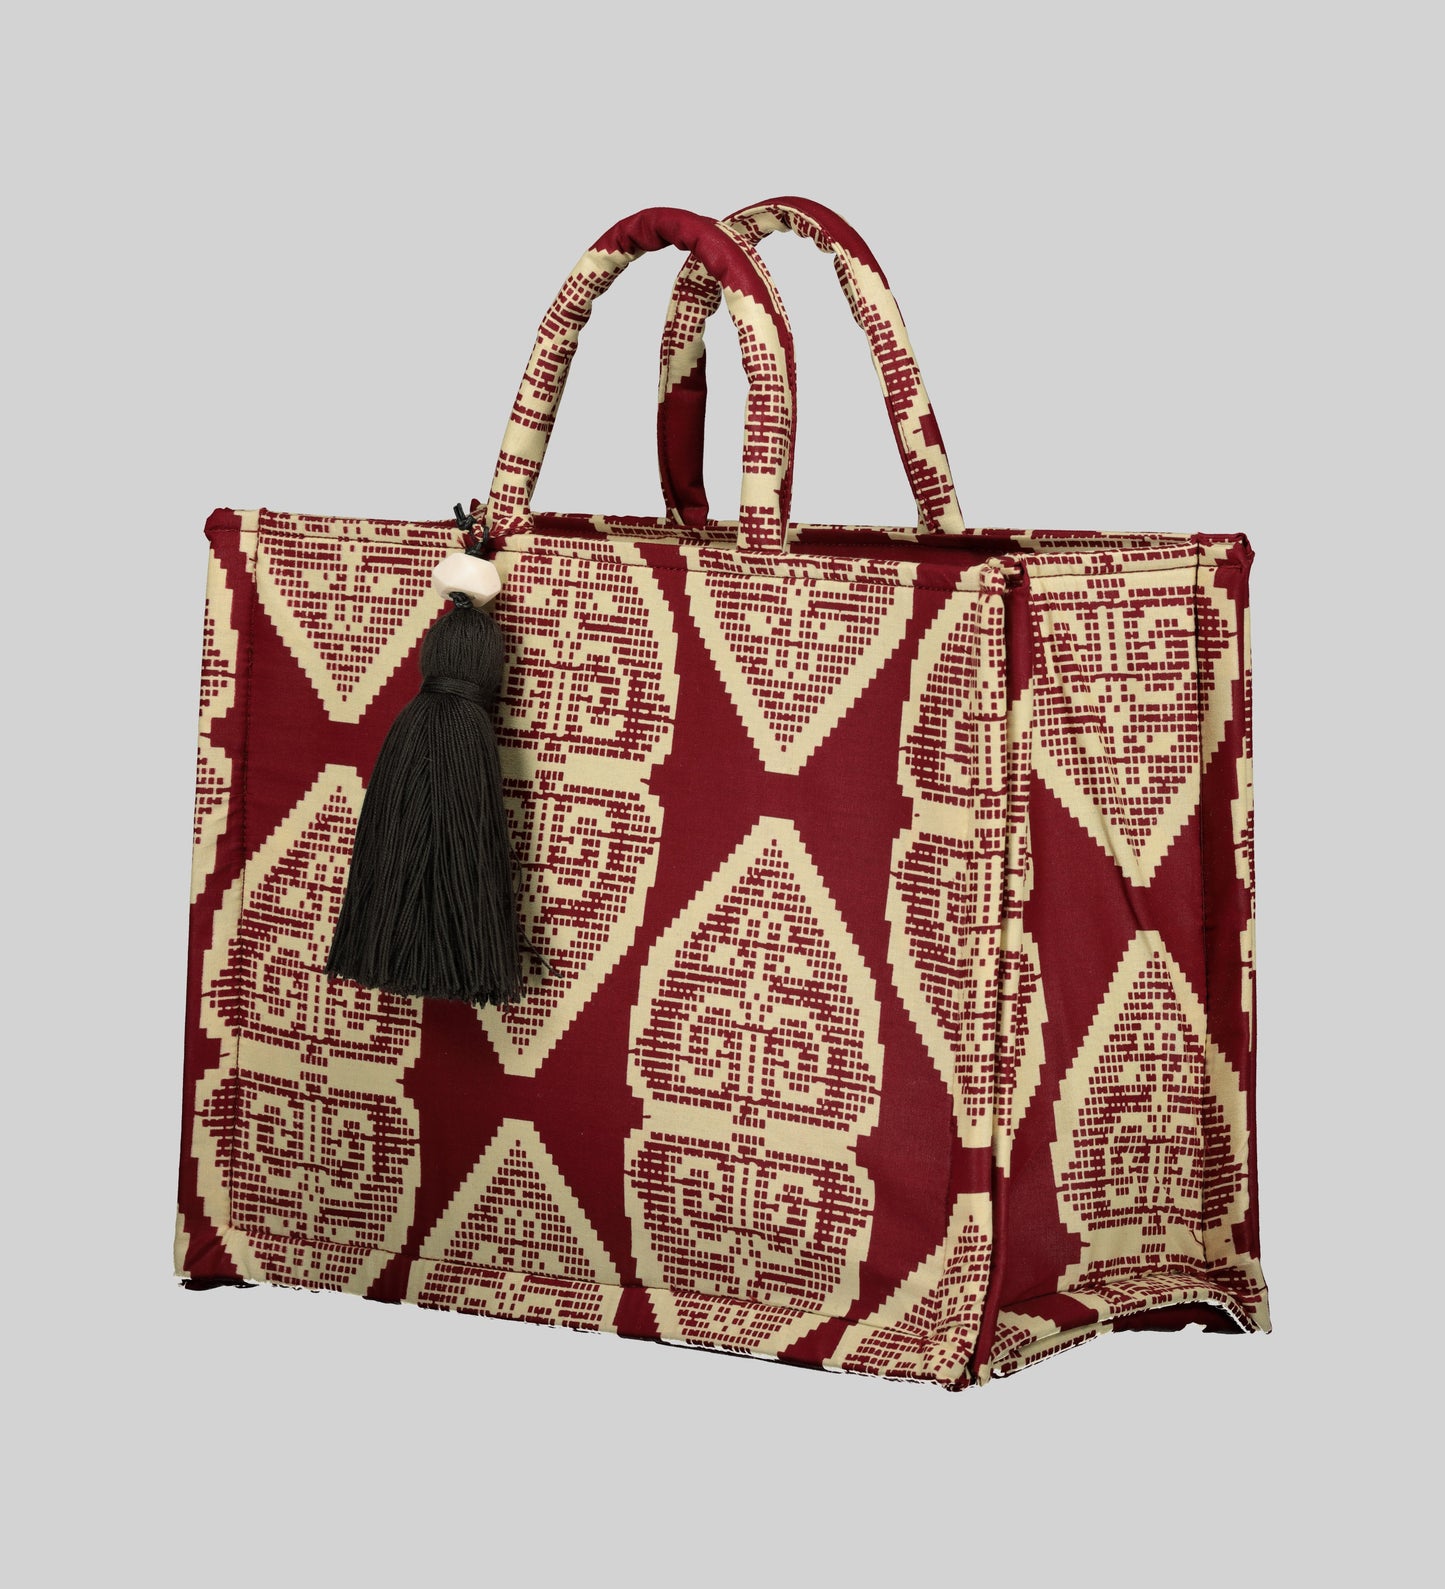 Mosaic Tile Print Tinee Tote Bag with Pouch Medium Burgundy & Beige